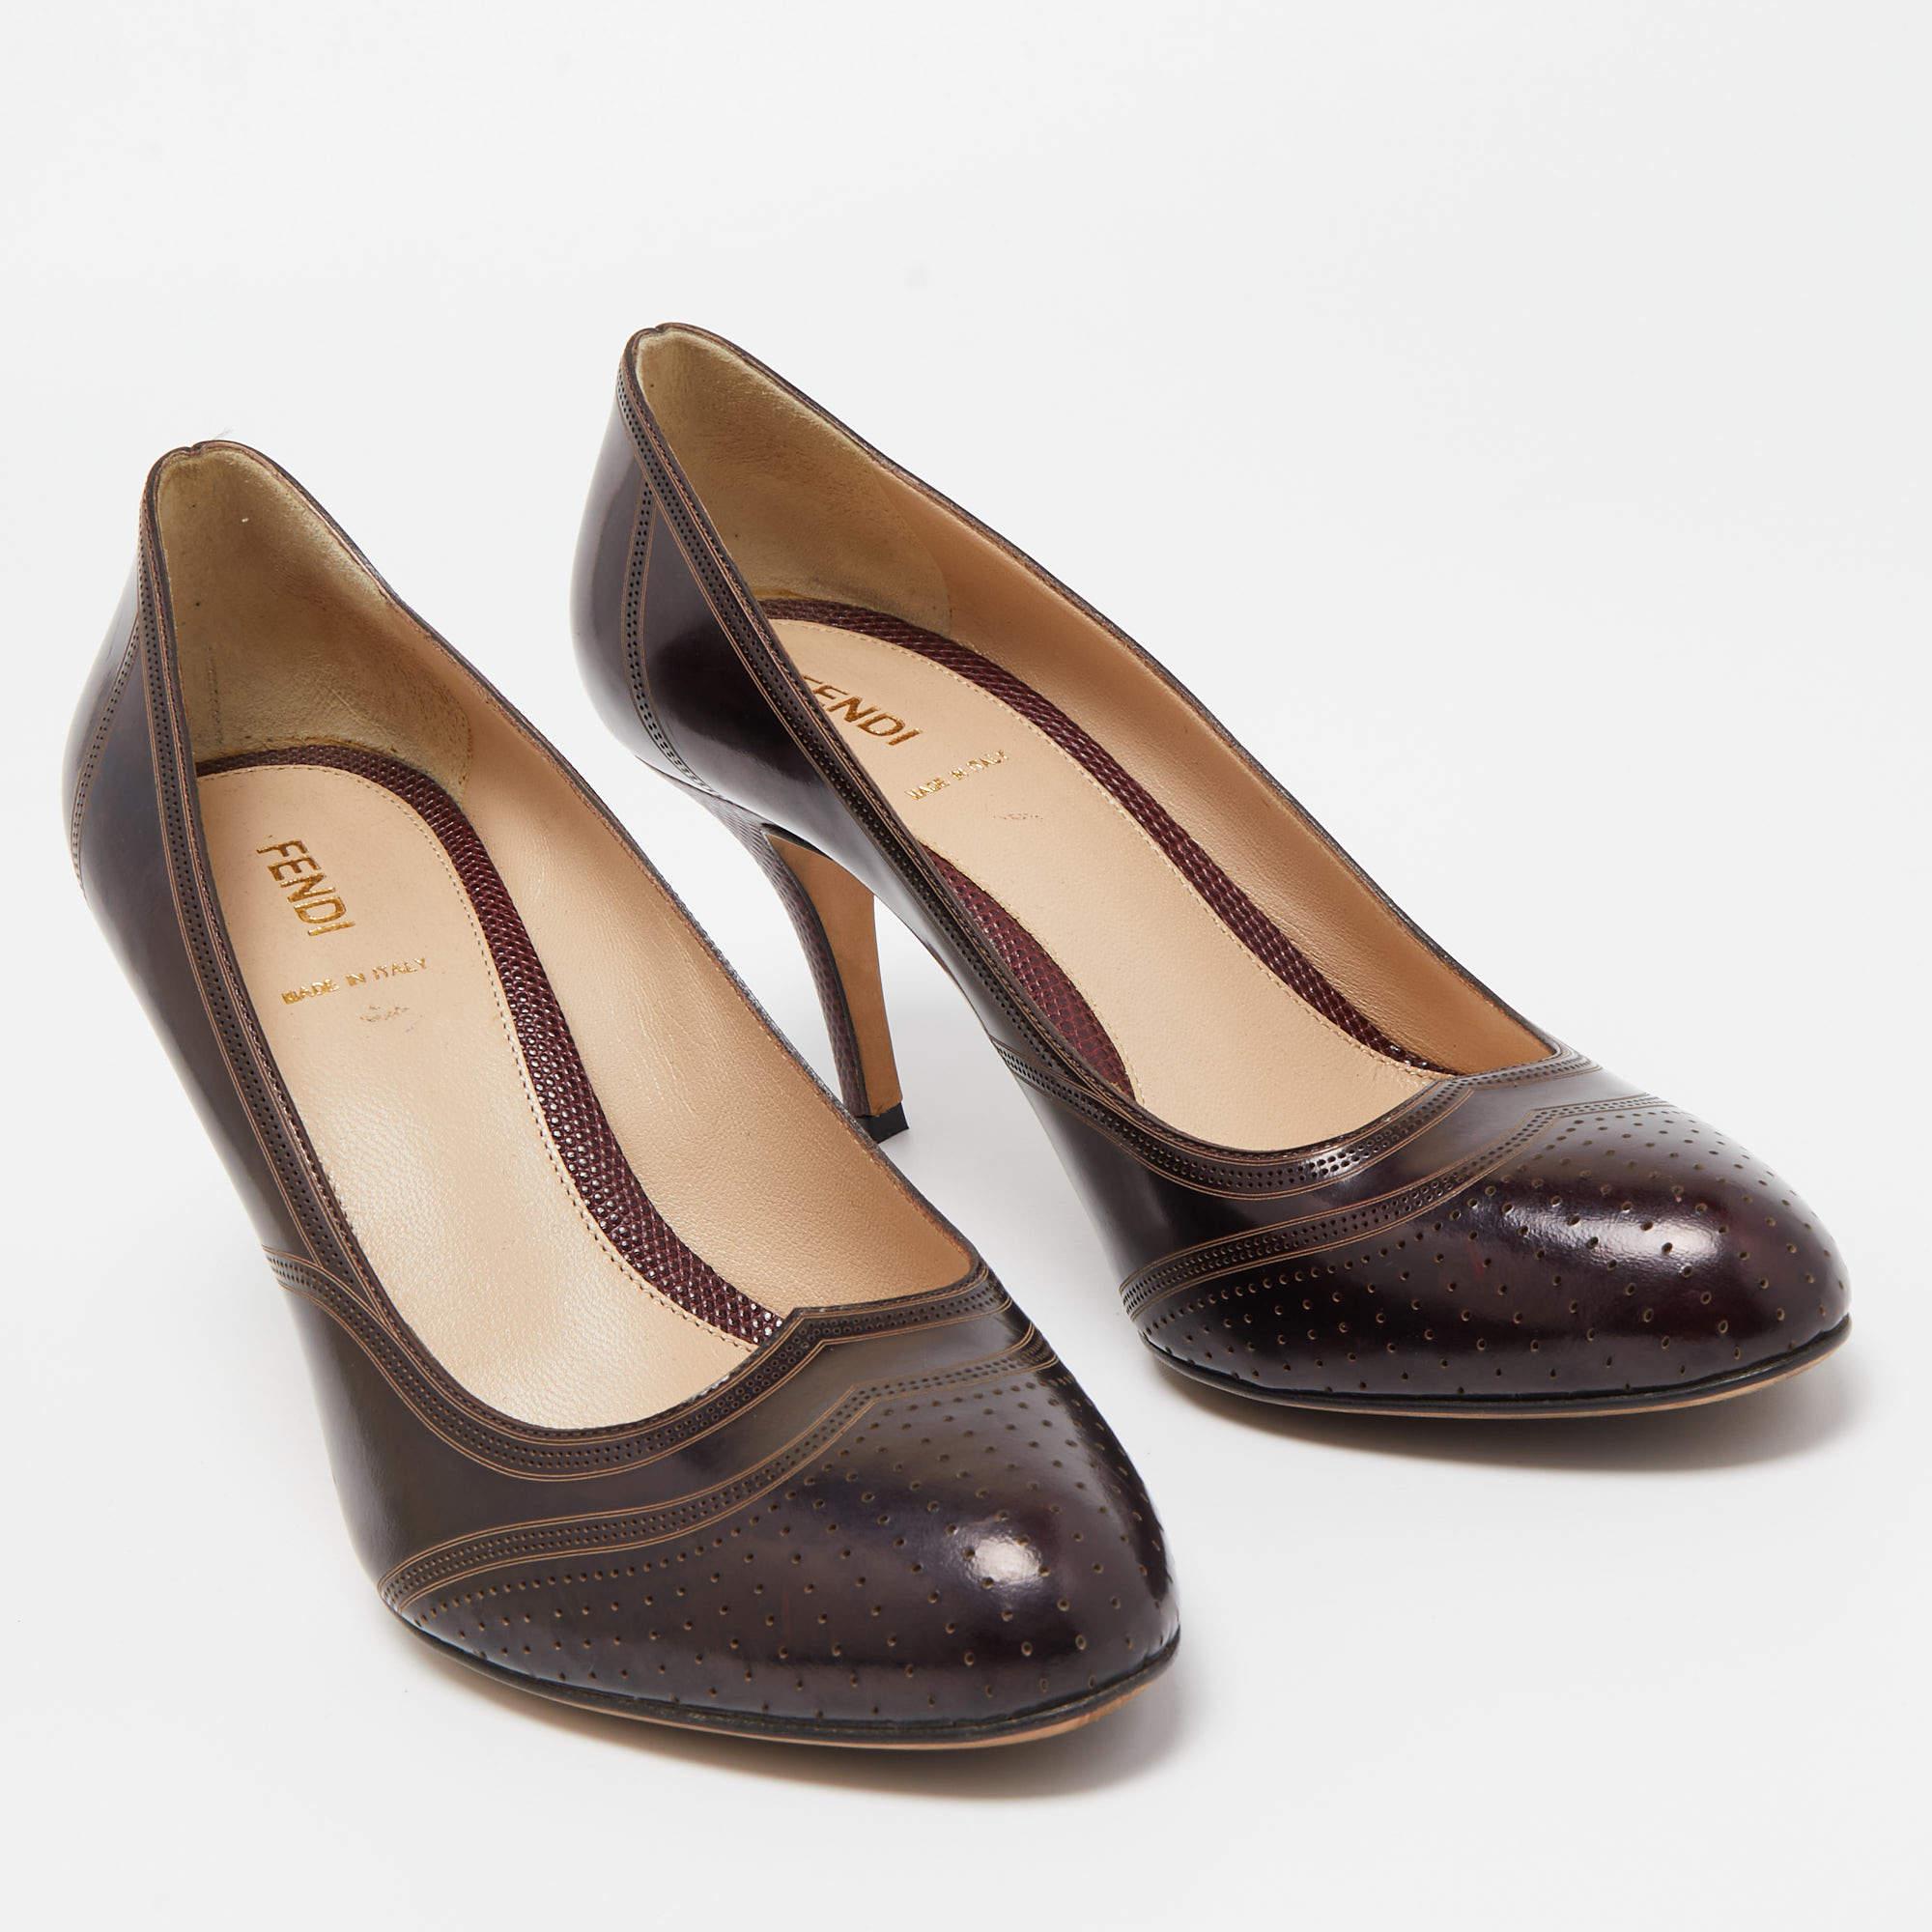 Fendi Brown Leather Perforated Brogue Detail Pumps Size 39.5 In Good Condition For Sale In Dubai, Al Qouz 2